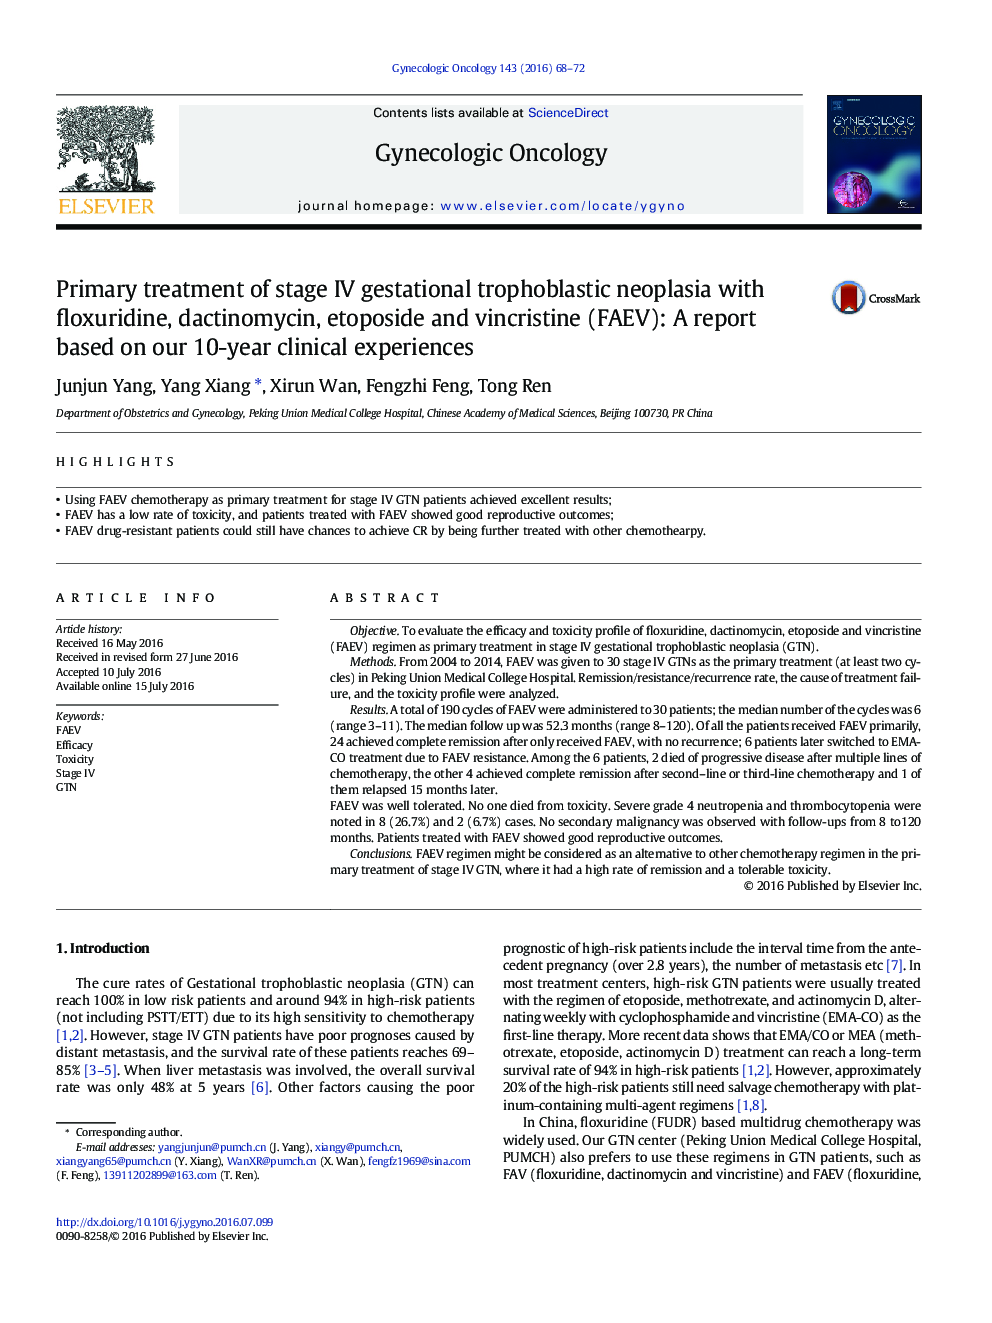 Primary treatment of stage IV gestational trophoblastic neoplasia with floxuridine, dactinomycin, etoposide and vincristine (FAEV): A report based on our 10-year clinical experiences